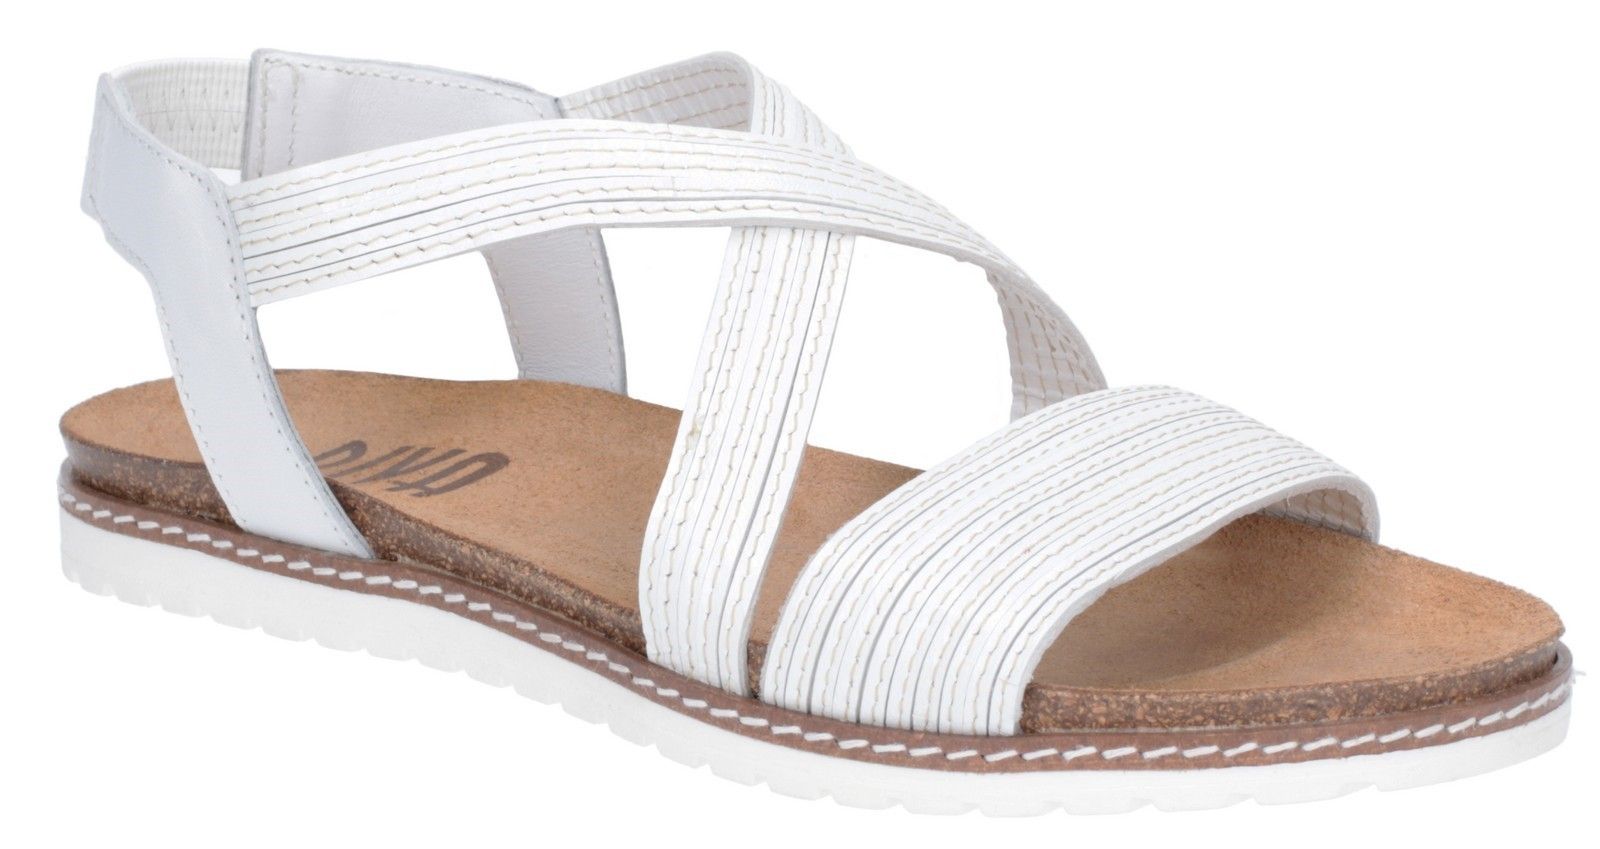 Spring into summer with these colourful multi-leather sandals from Riva.  A leather lined footbed cushions the feet ideal for your summer vacations. Slip-on open-toe sandal design. 
Crafted with a luxury multi-leather upper. 
Flexible cross-over mule strap. 
Sling back strap with elasticated comfort fit. 
Ergonomically shaped leather lined footbed.